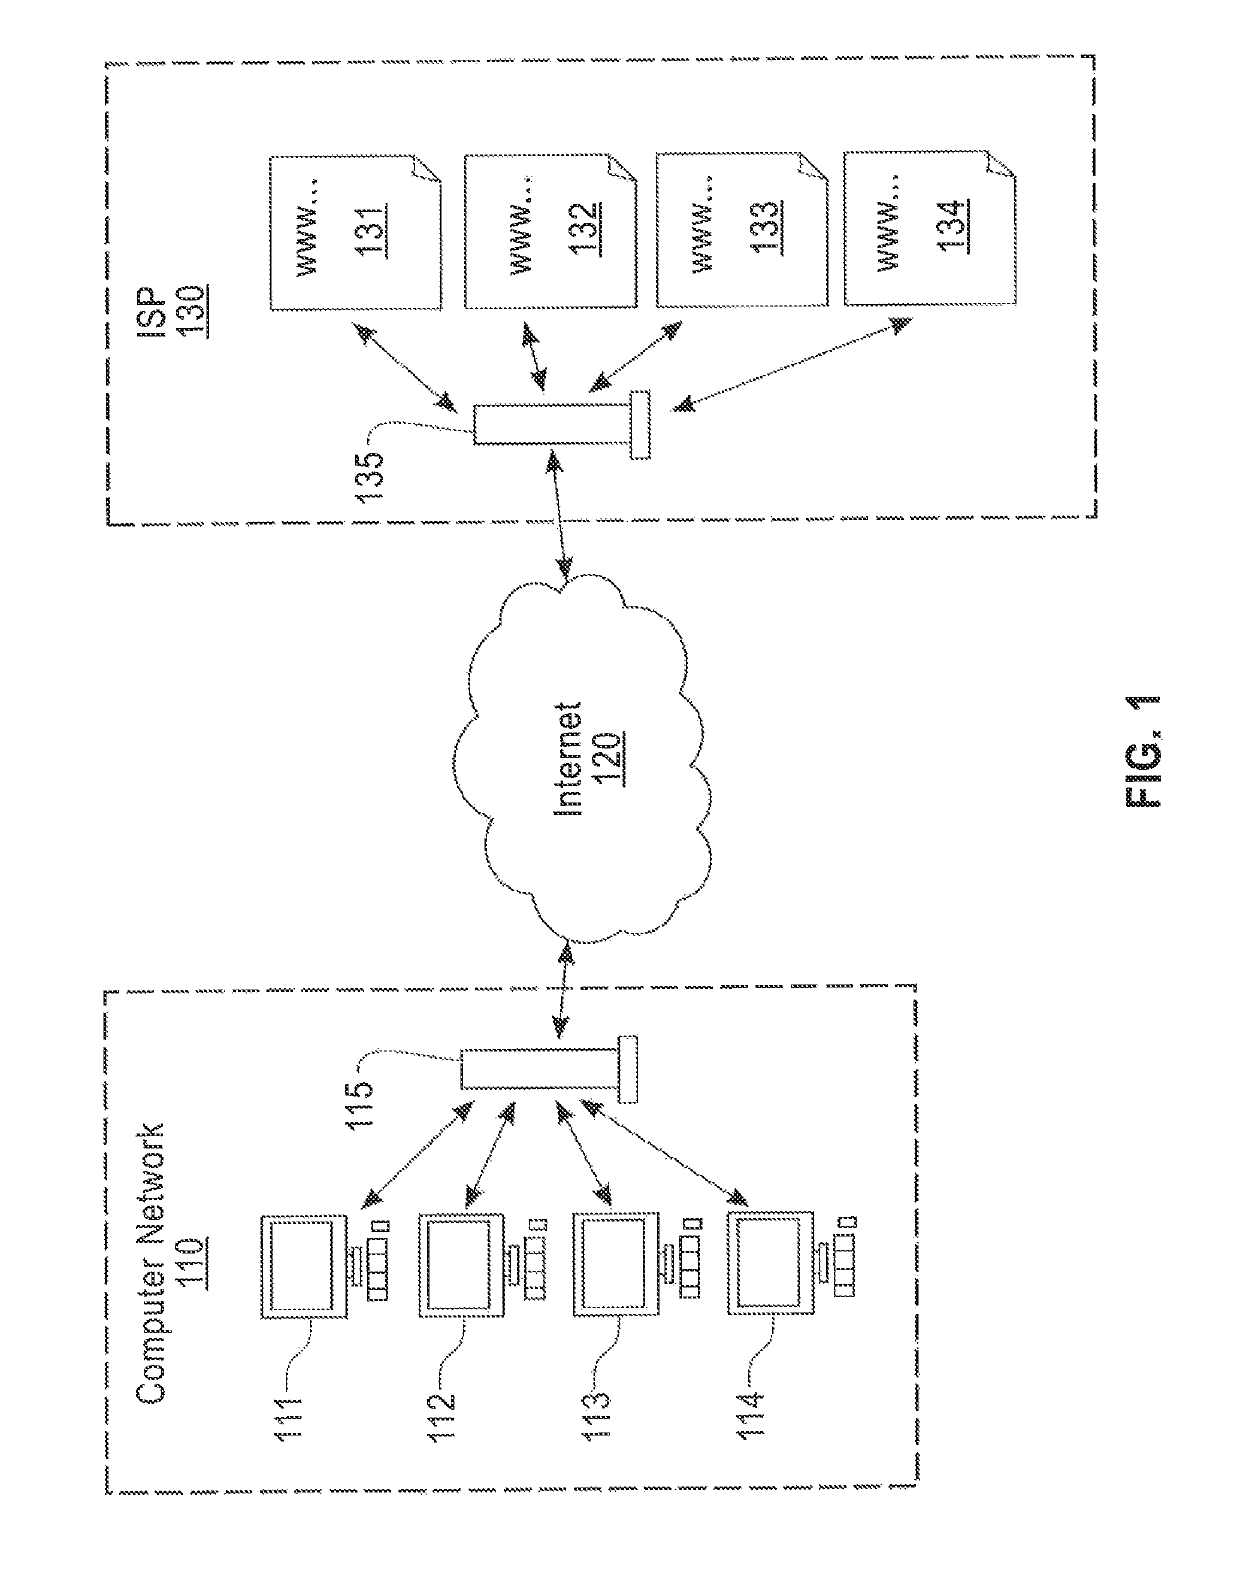 Network security apparatus and method of detecting malicious behavior in computer networks via cost-sensitive and connectivity constrained classification